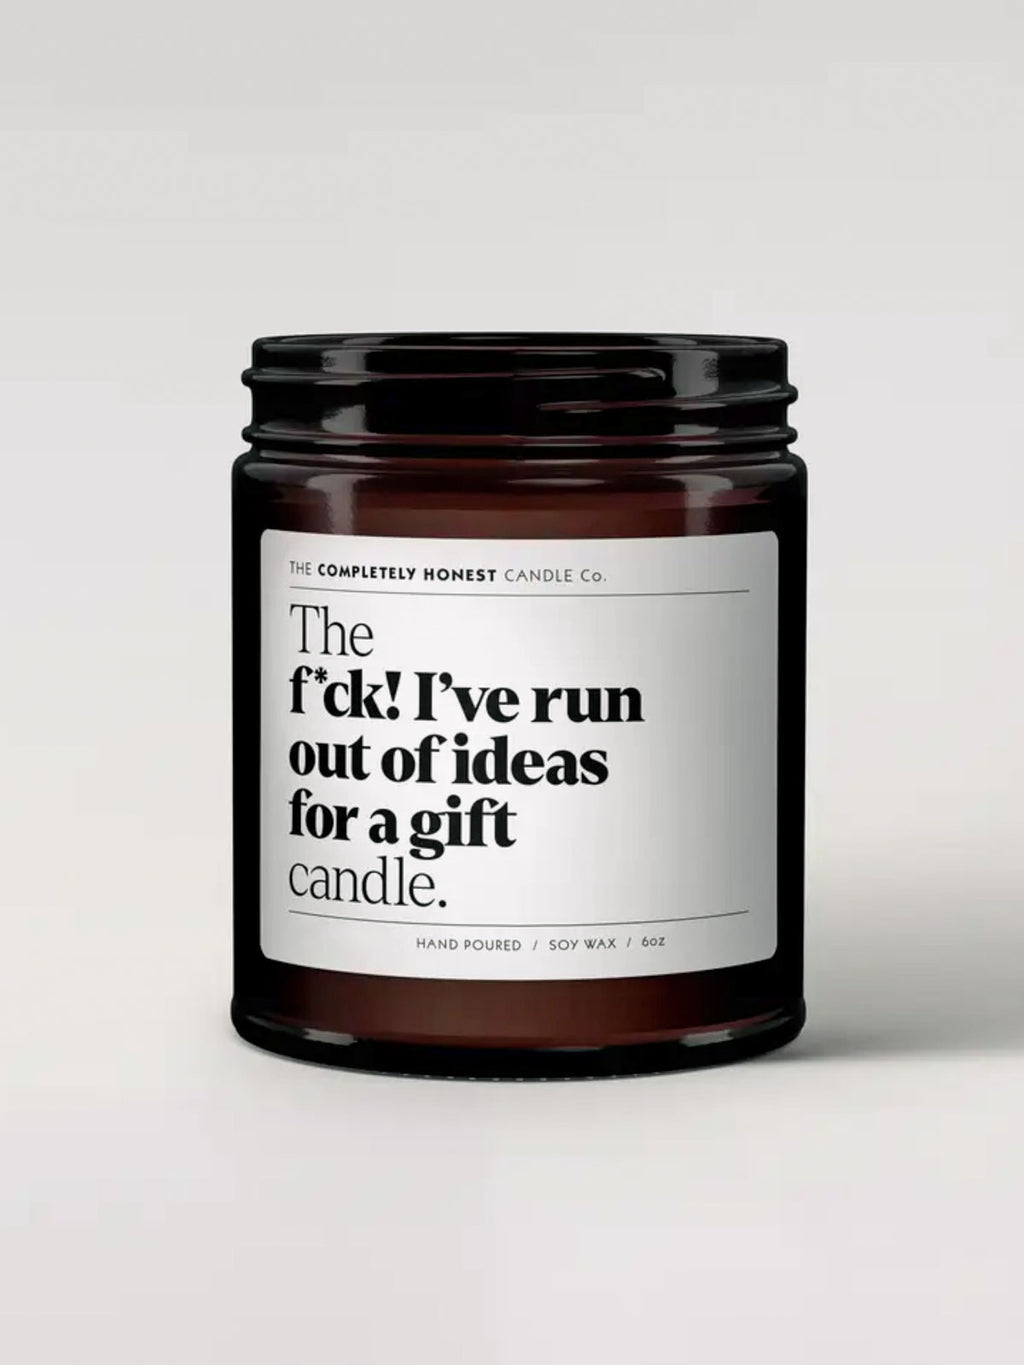 F*ck! I've run out of ideas for a gift - Candle, Musky